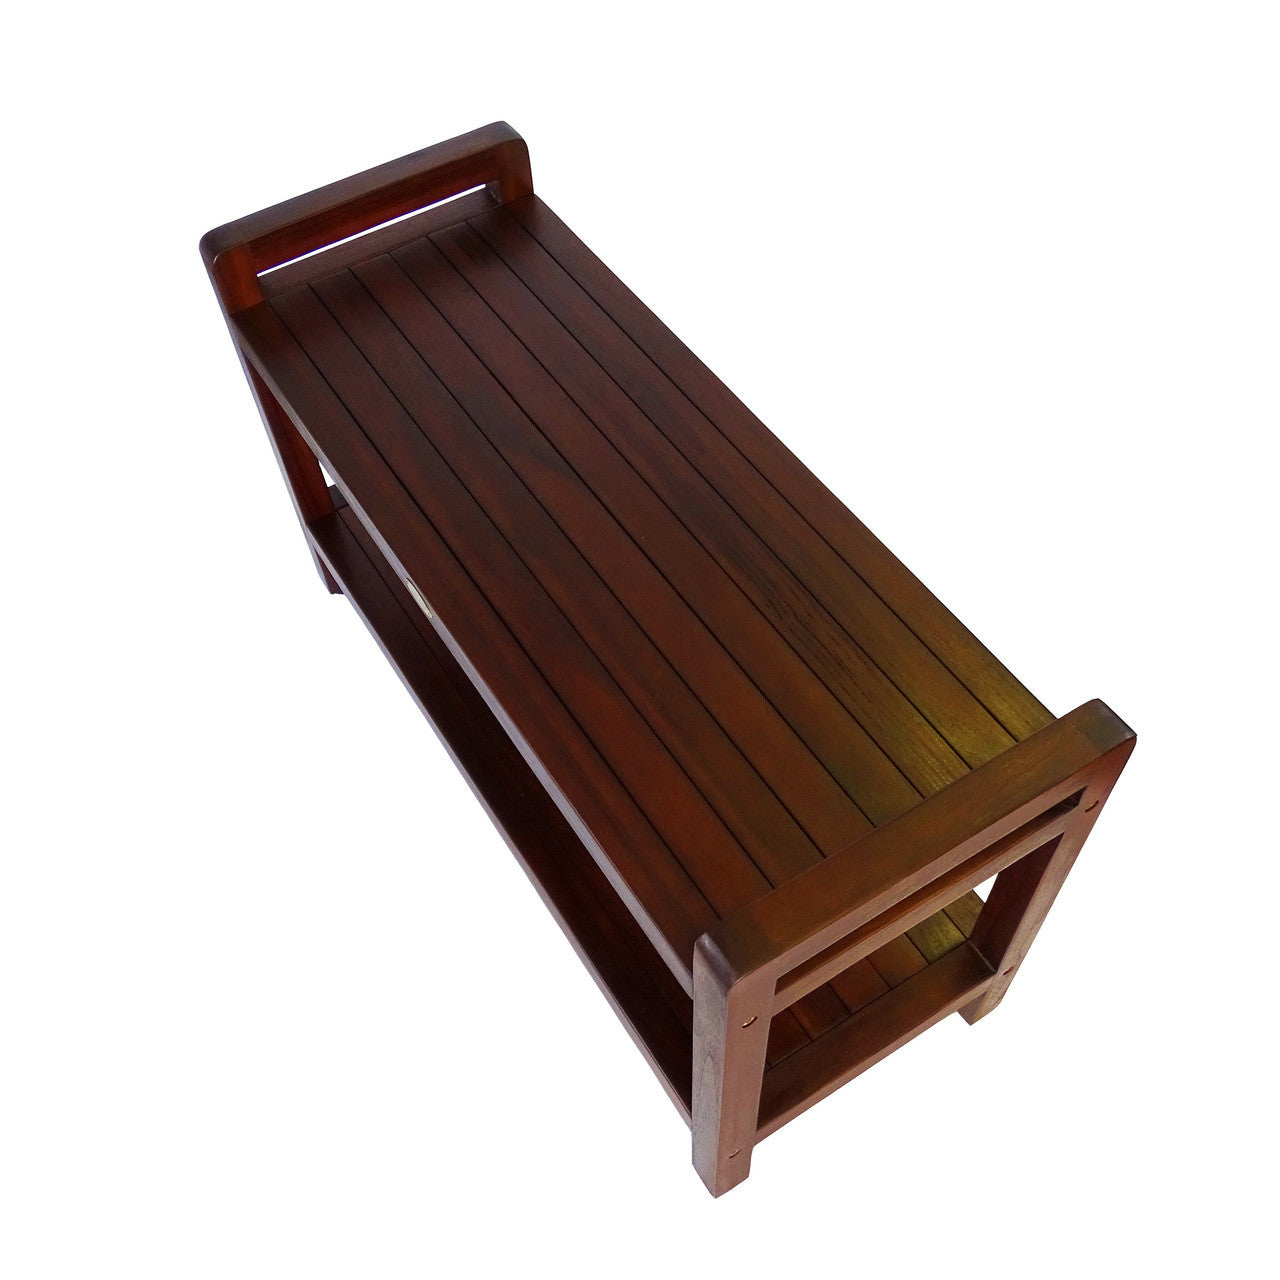 DecoTeak Eleganto 35"L Teak Wood Shower Bench with LiftAide Arms and Shelf in Woodland Brown Finish